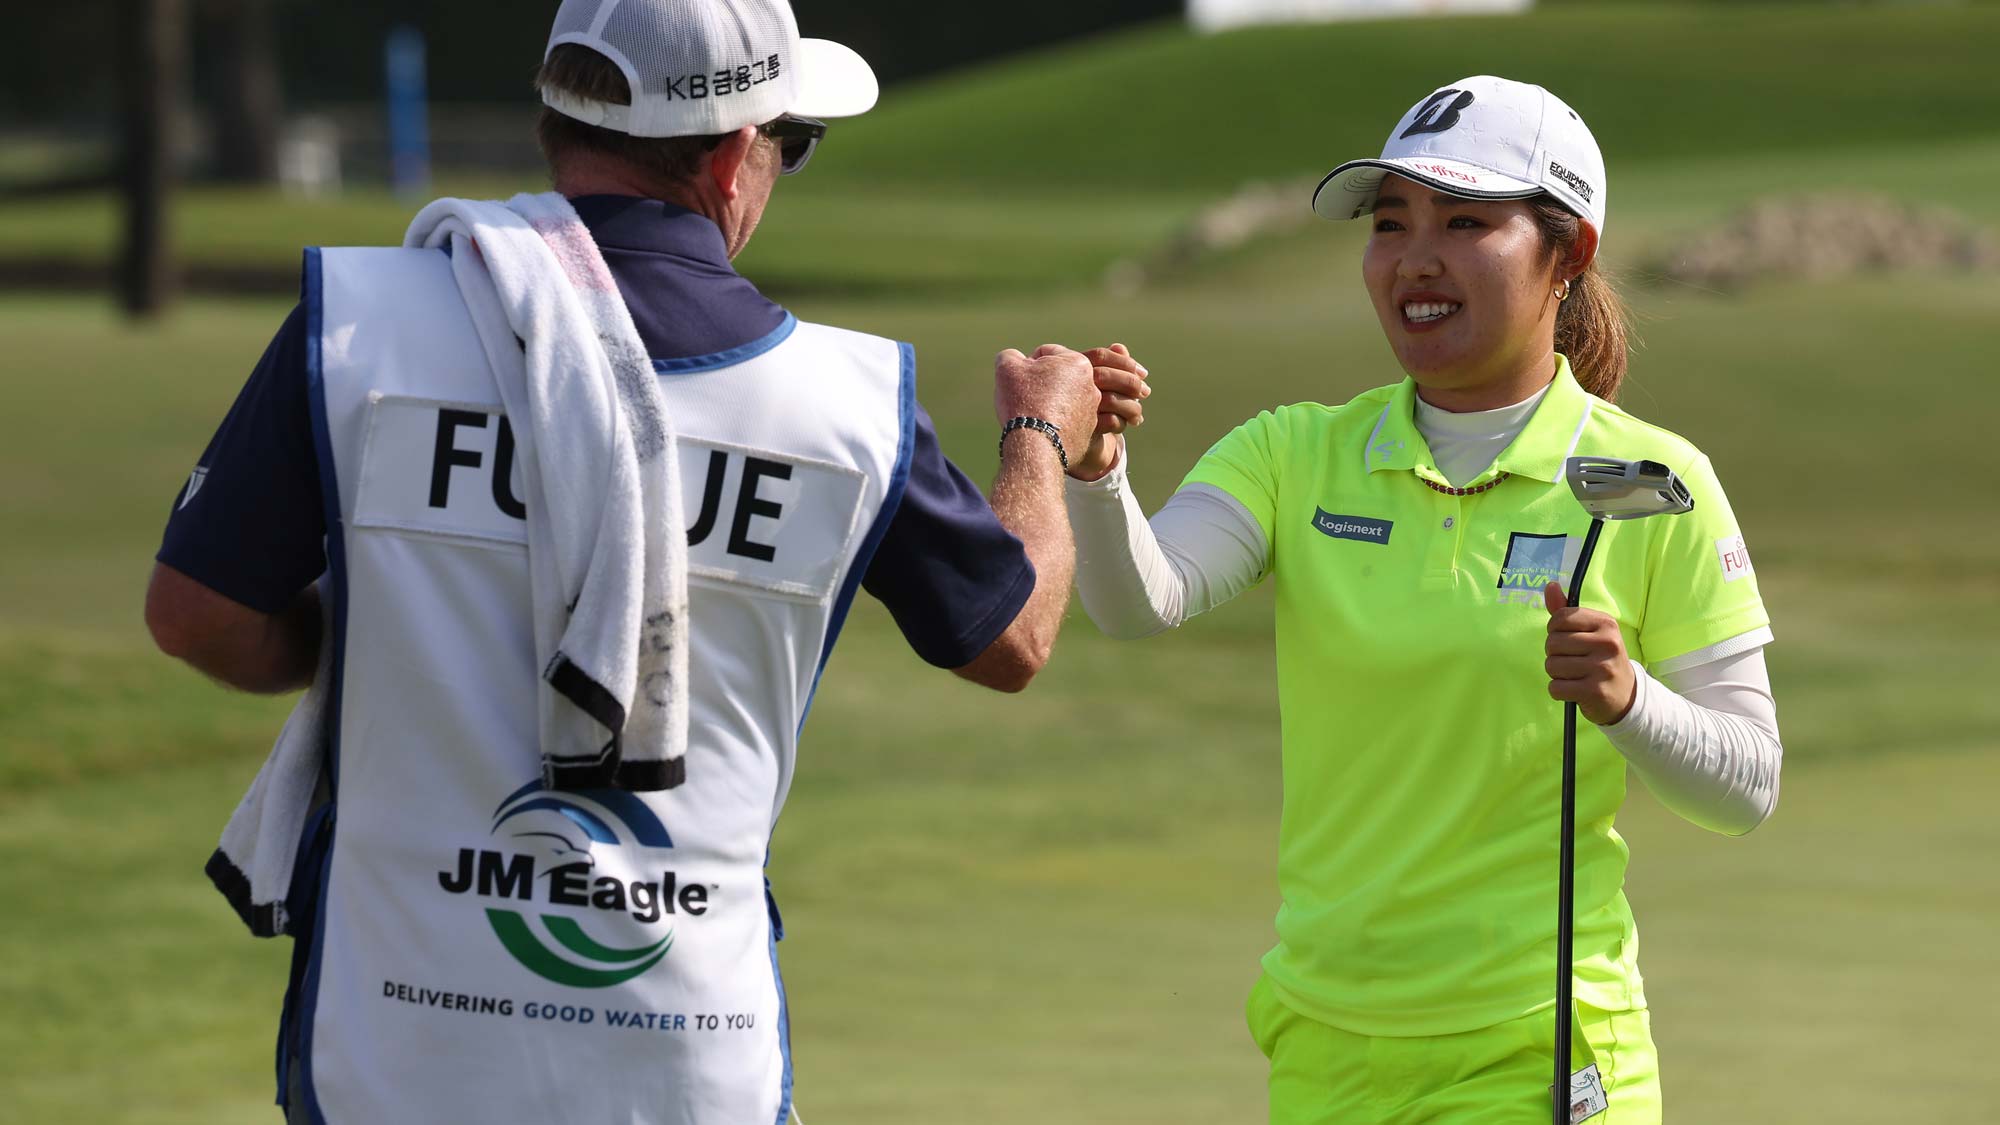 Ayaka Furue of Japan celebrates with her caddie on the 18th green during the final round of the JM Eagle LA Championship presented by Plastpro